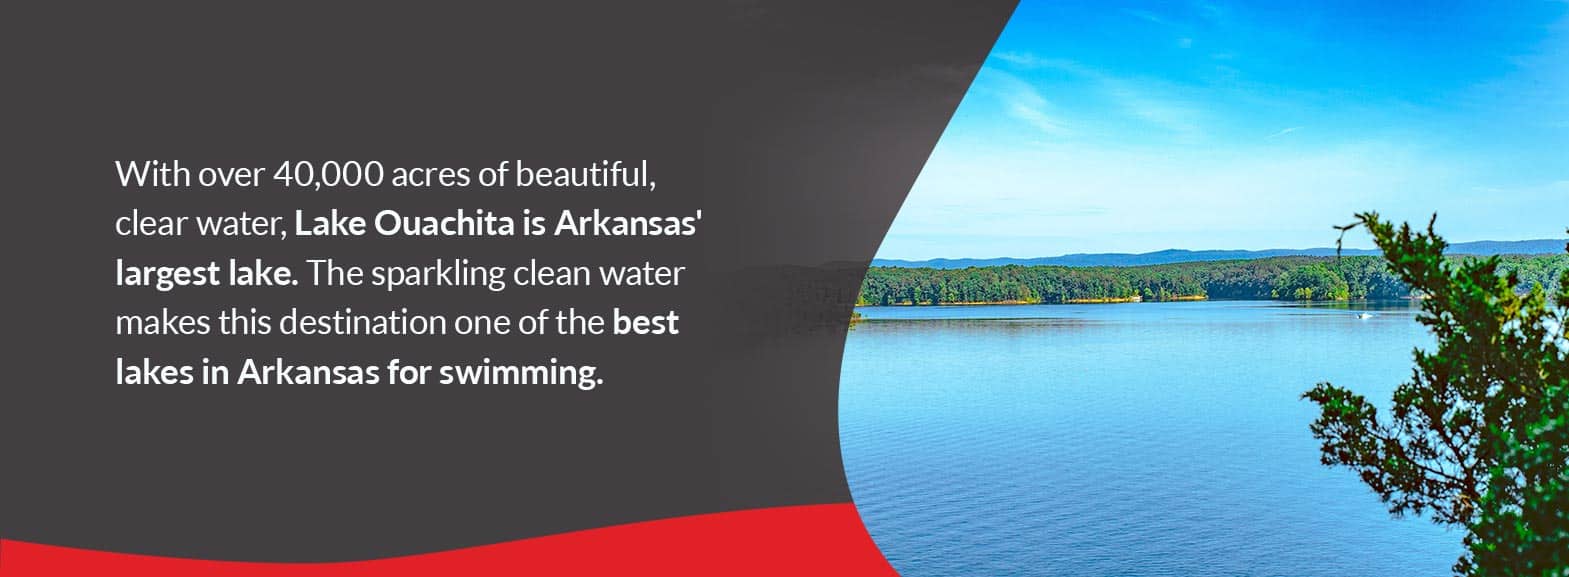 With over 40,000 acres of beautiful, clear water, Lake Ouachita is Arkansas' largest lake. The sparkling clean water makes this destination one of the best lakes in Arkansas for swimming.